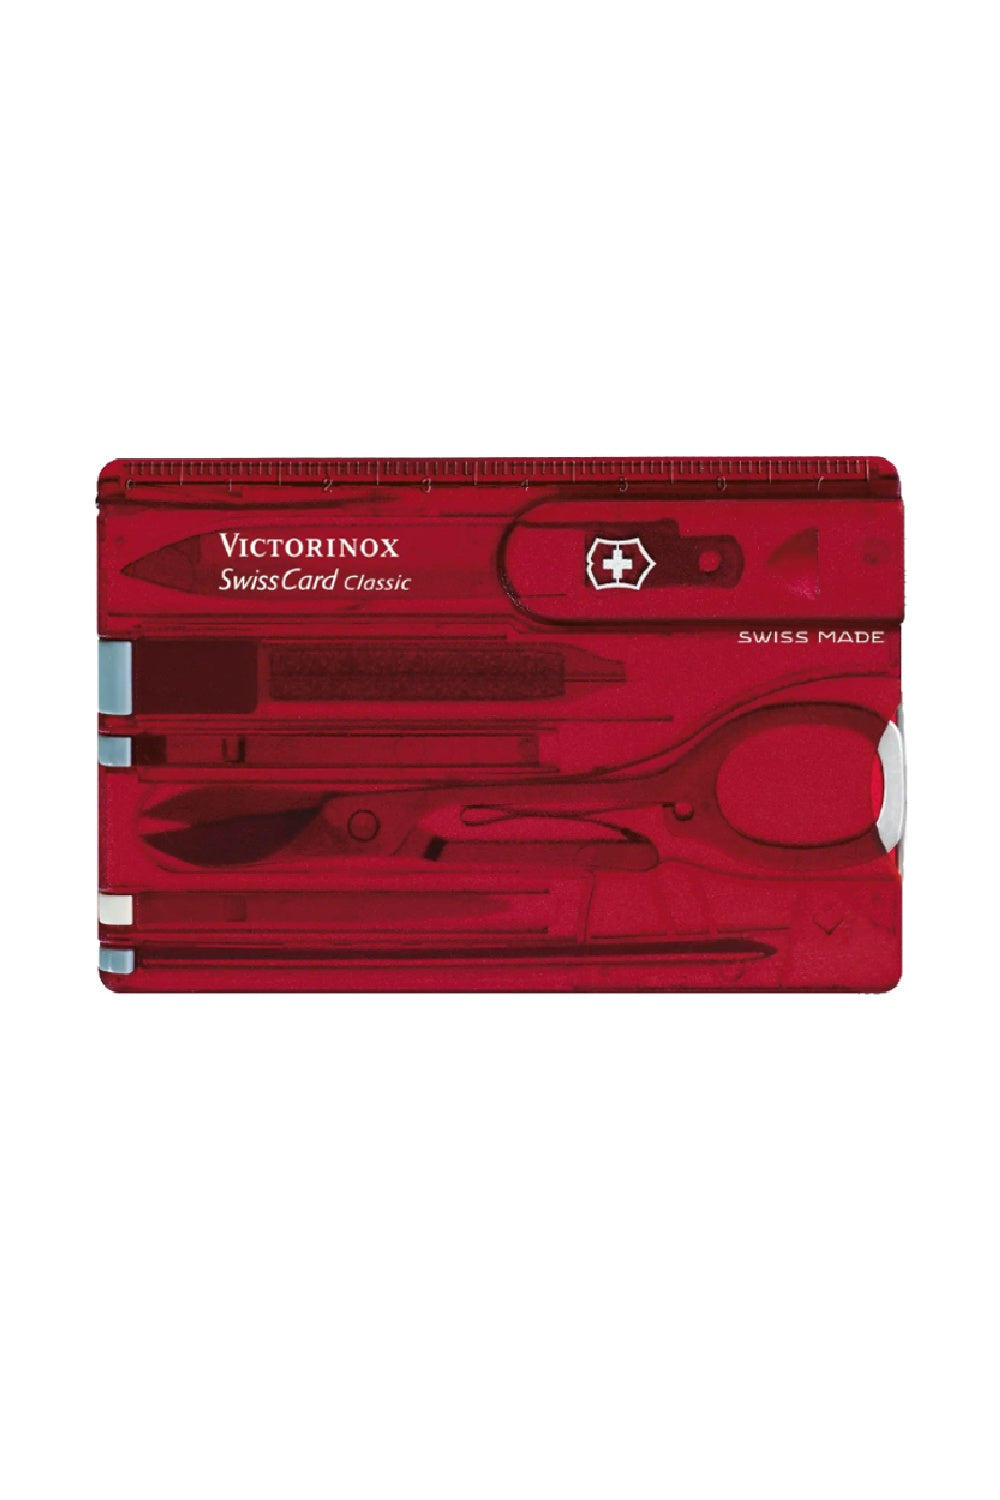 Victorinox Swiss Card Classic in Red Transparent 